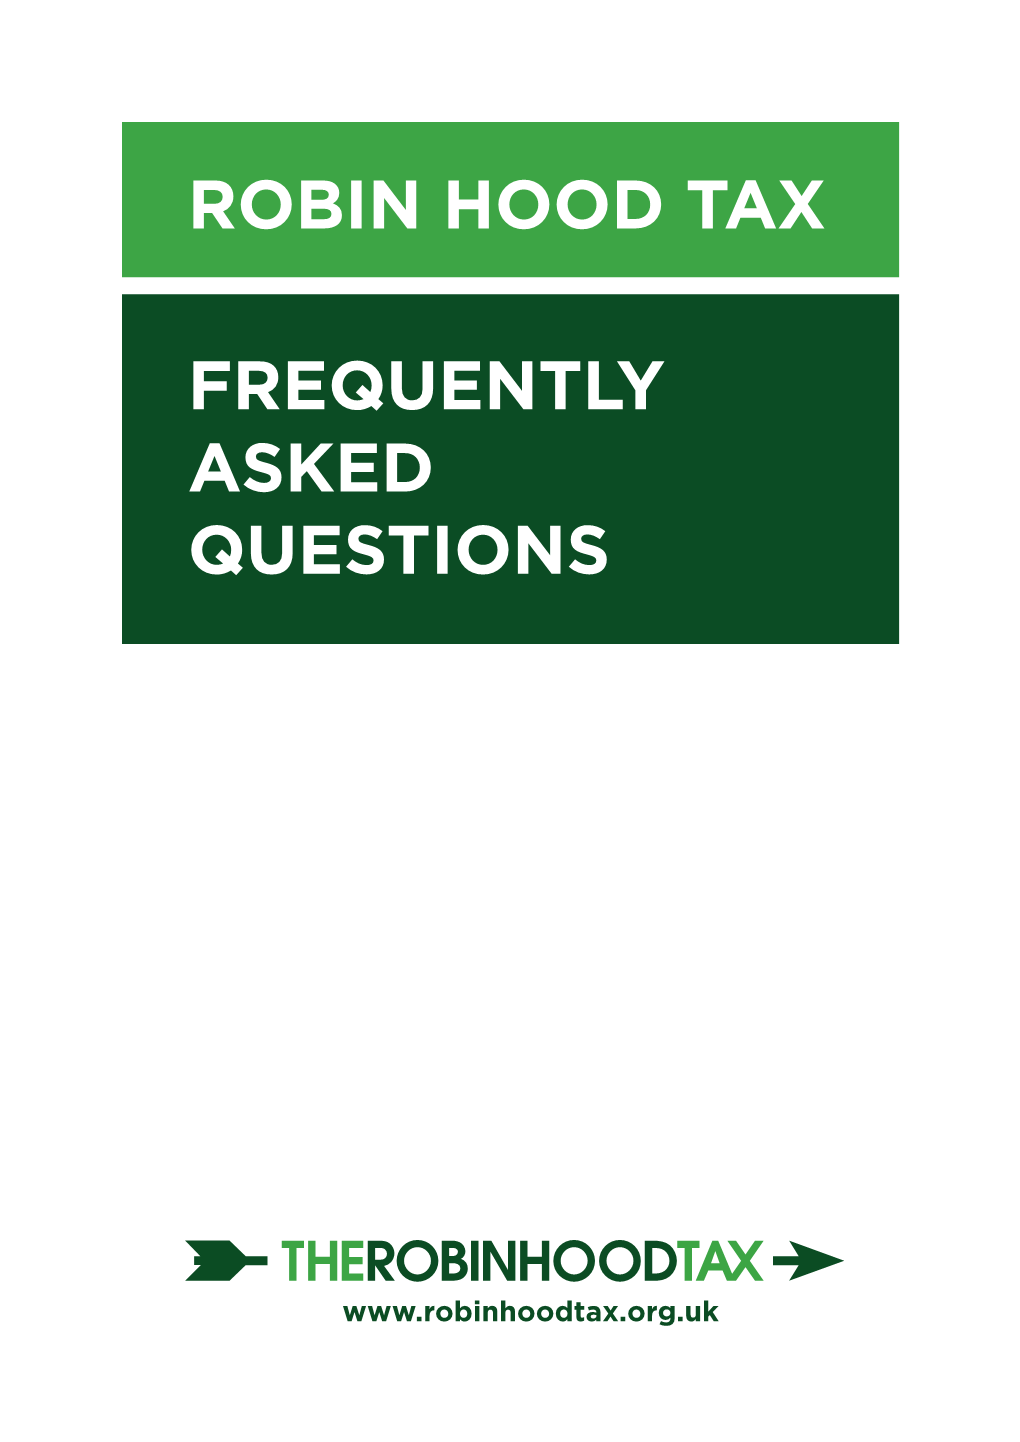 Robin Hood Tax Frequently Asked Questions